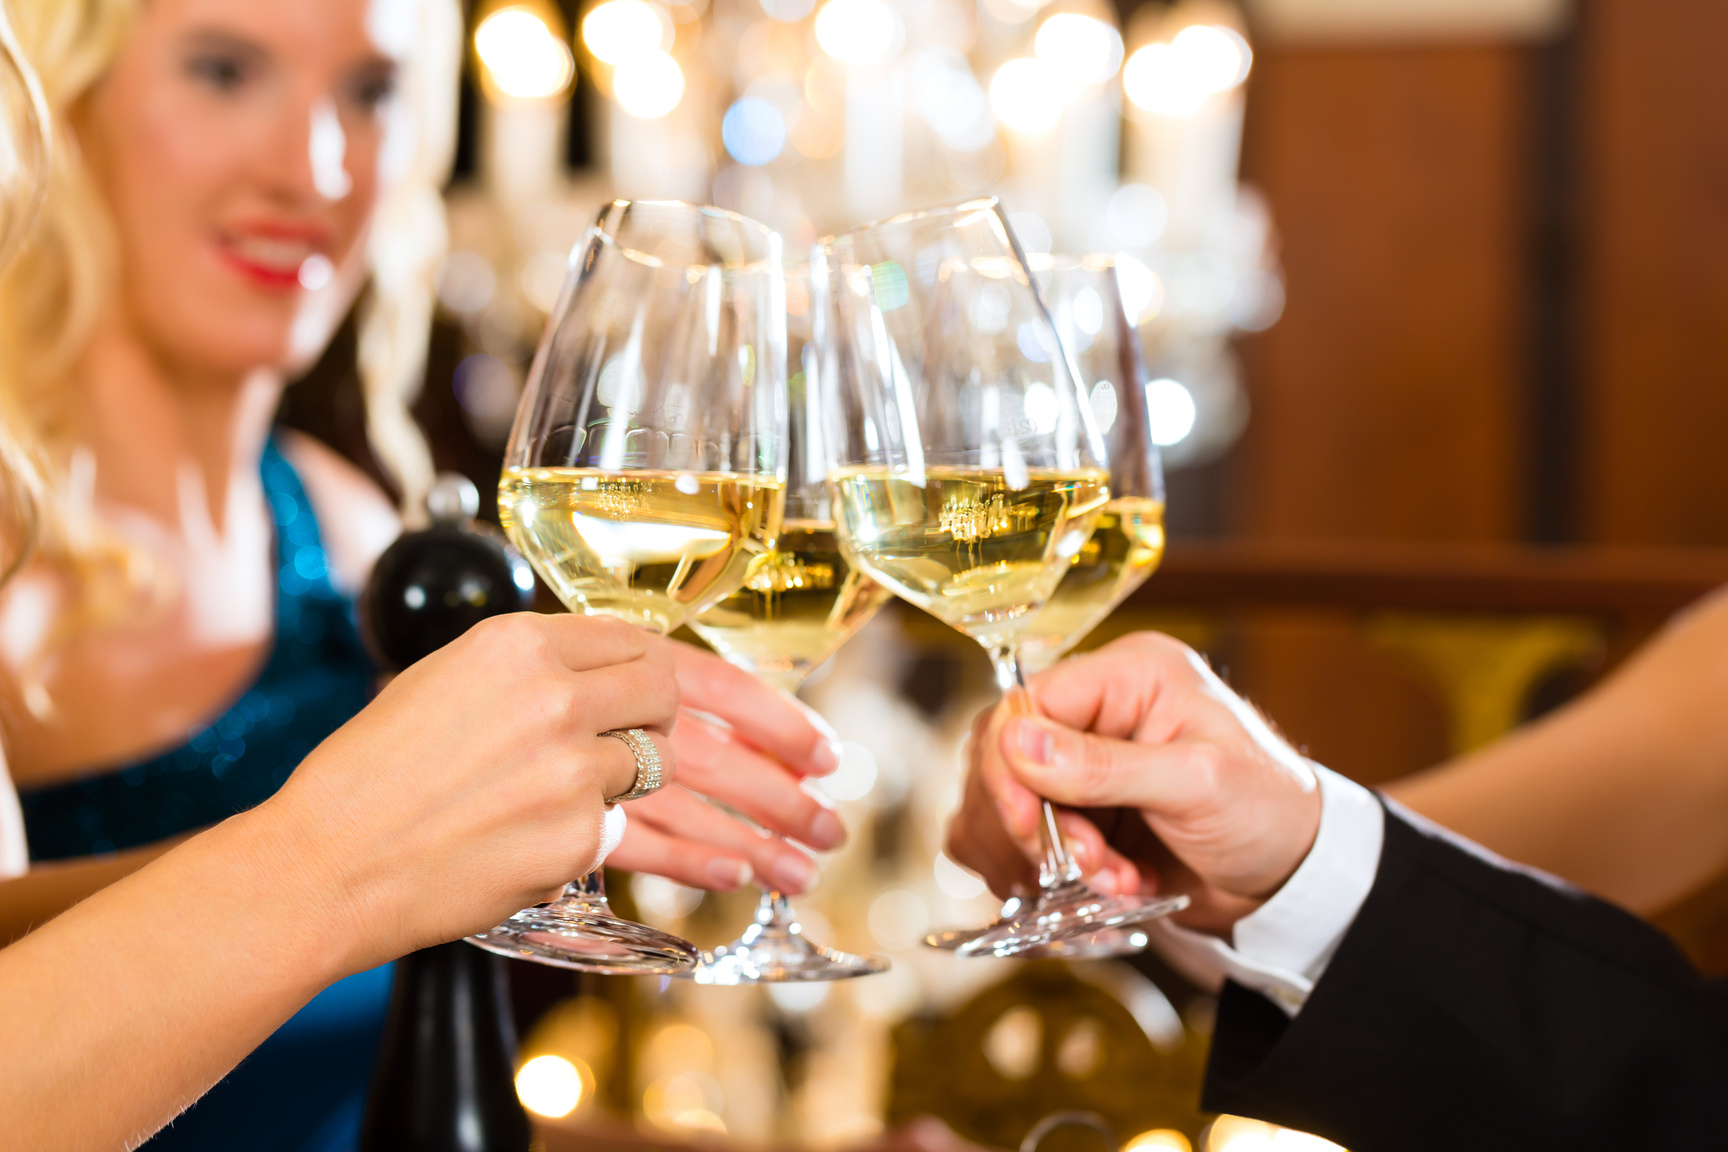 Man and Woman Tasting Champagne in Restaurant